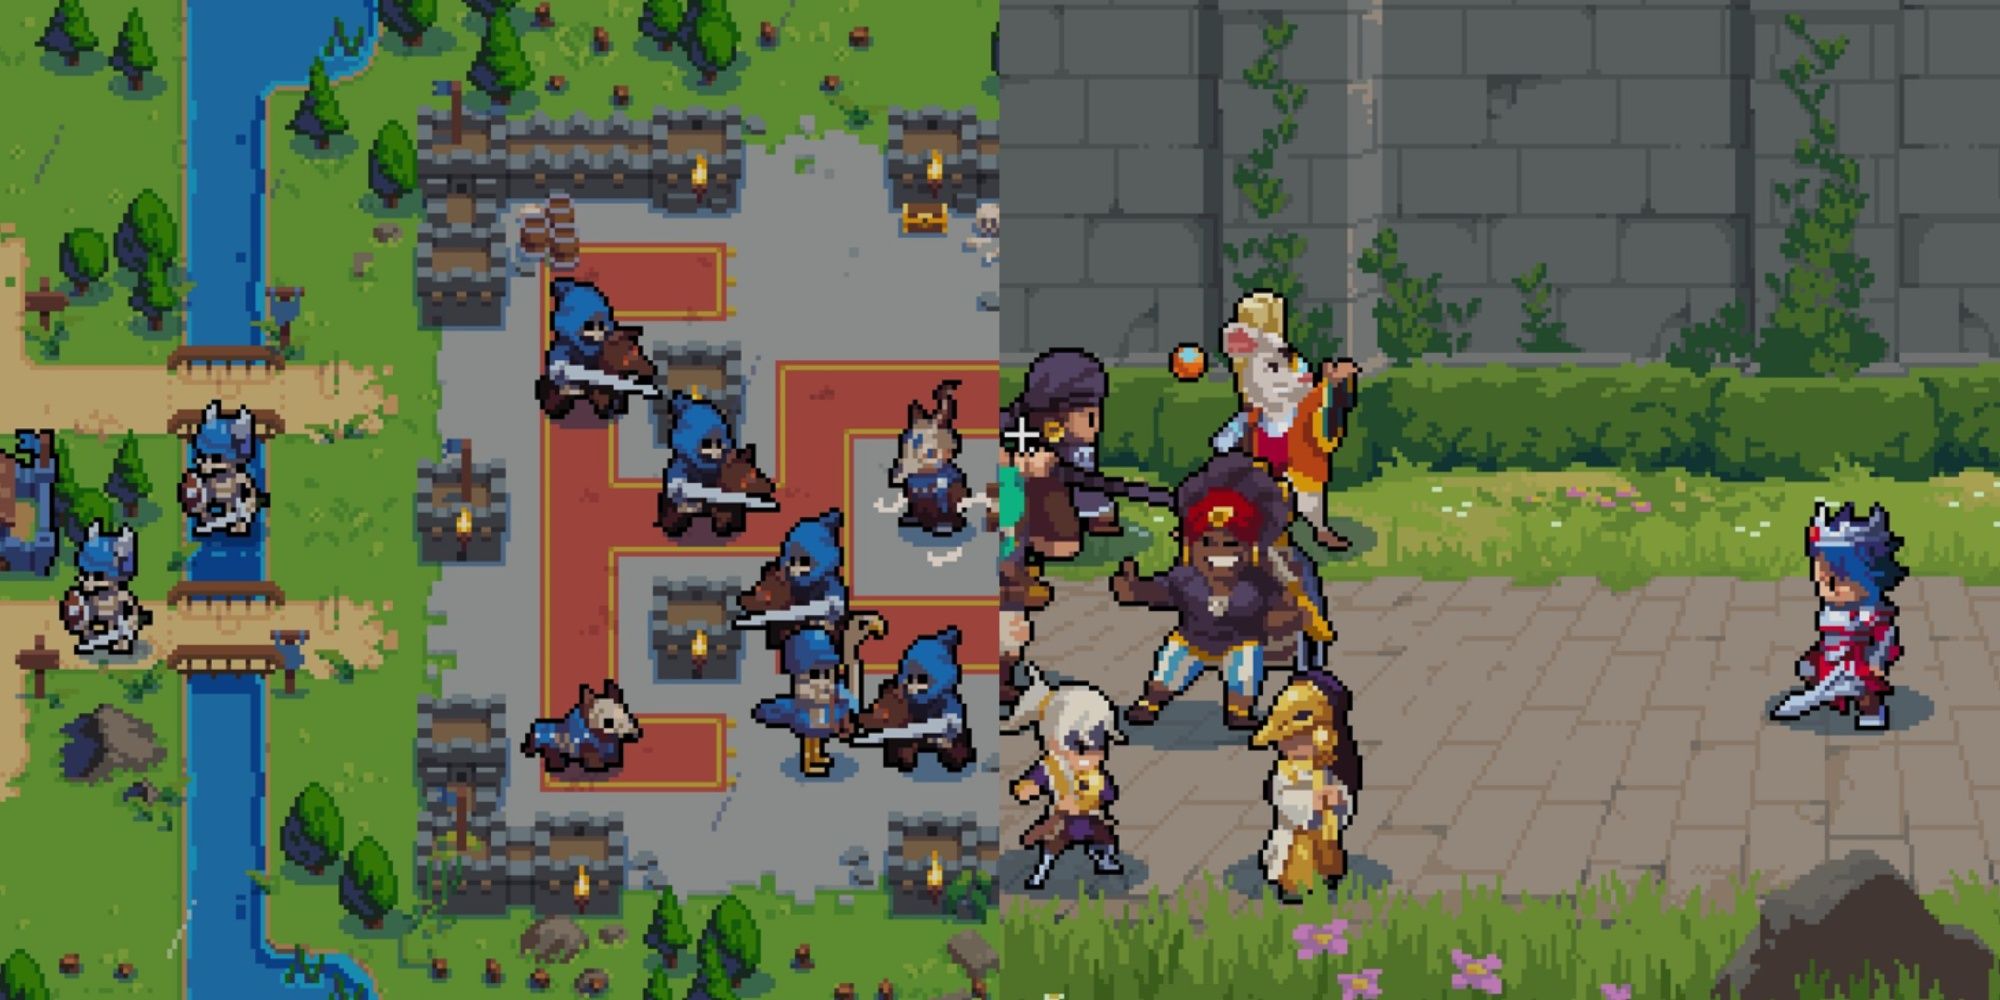 A collage of Valder preparing his army for combat and Mercia celebrating a victory with others in Wargroove 2.